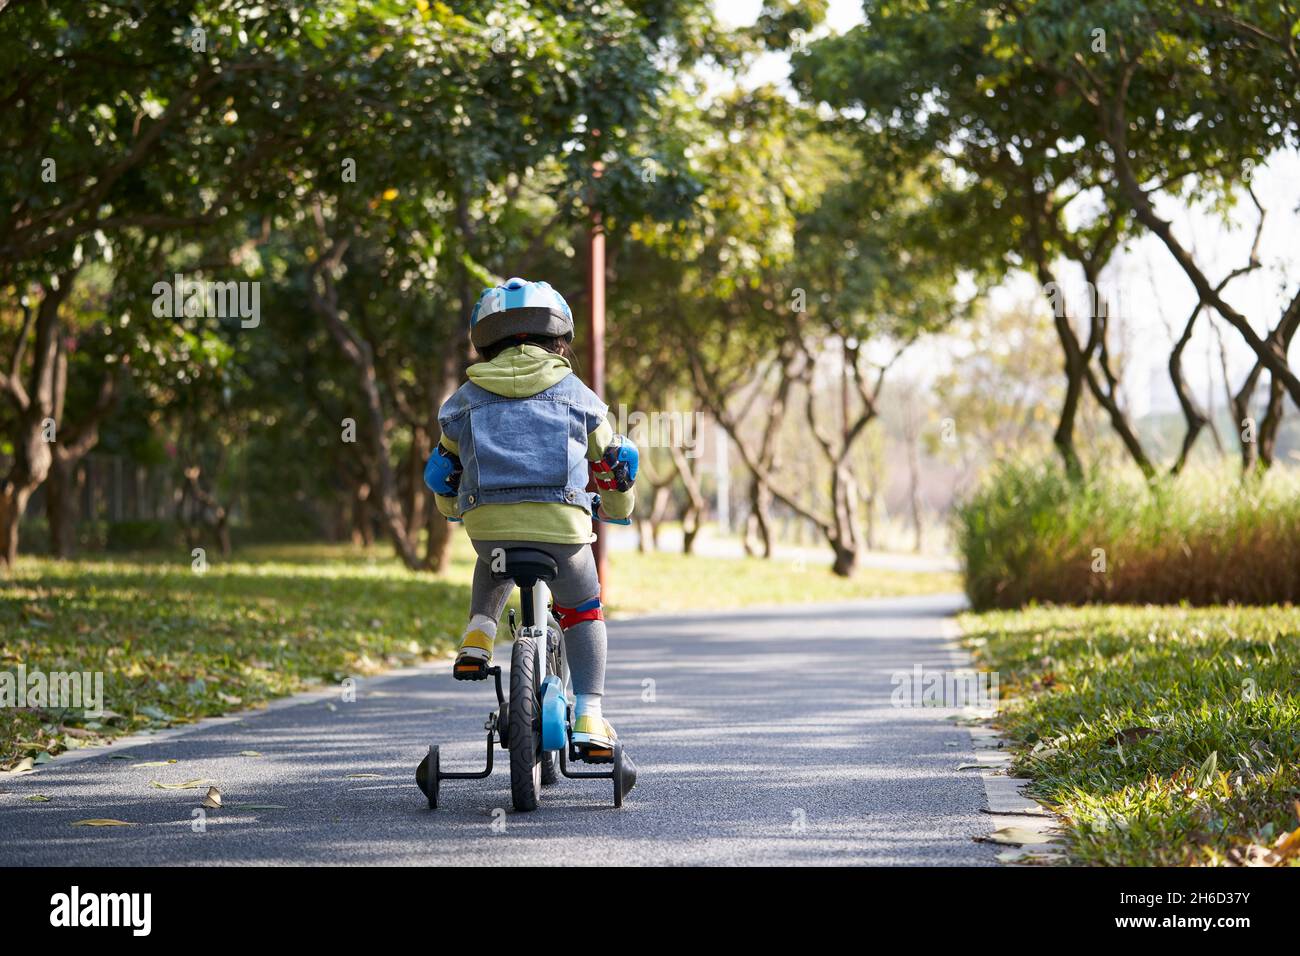 rear view of a little asian girl in full protection gear riding bike outdoors in city park Stock Photo